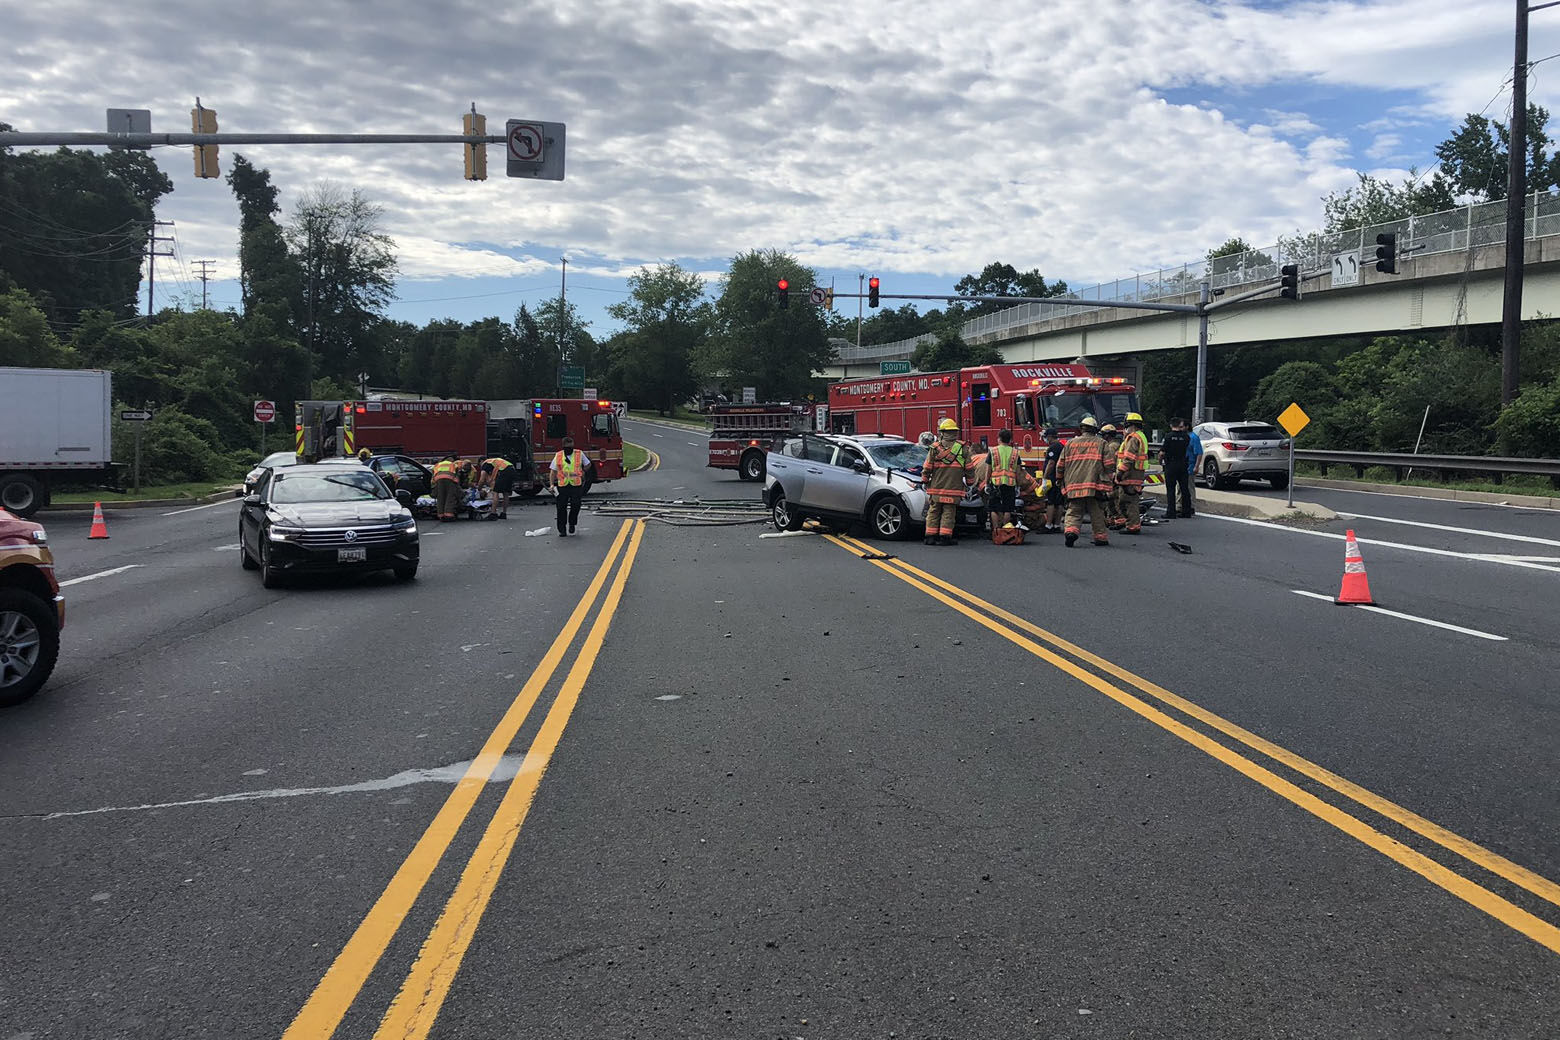 The crash happened just after 9 a.m. Tuesday when two vehicles apparently collided and then two subsequent vehicles crashed into the initial wreck, according to the Montgomery County Fire and Rescue Service. (Courtesy Montgomery County Fire and Rescue Service)